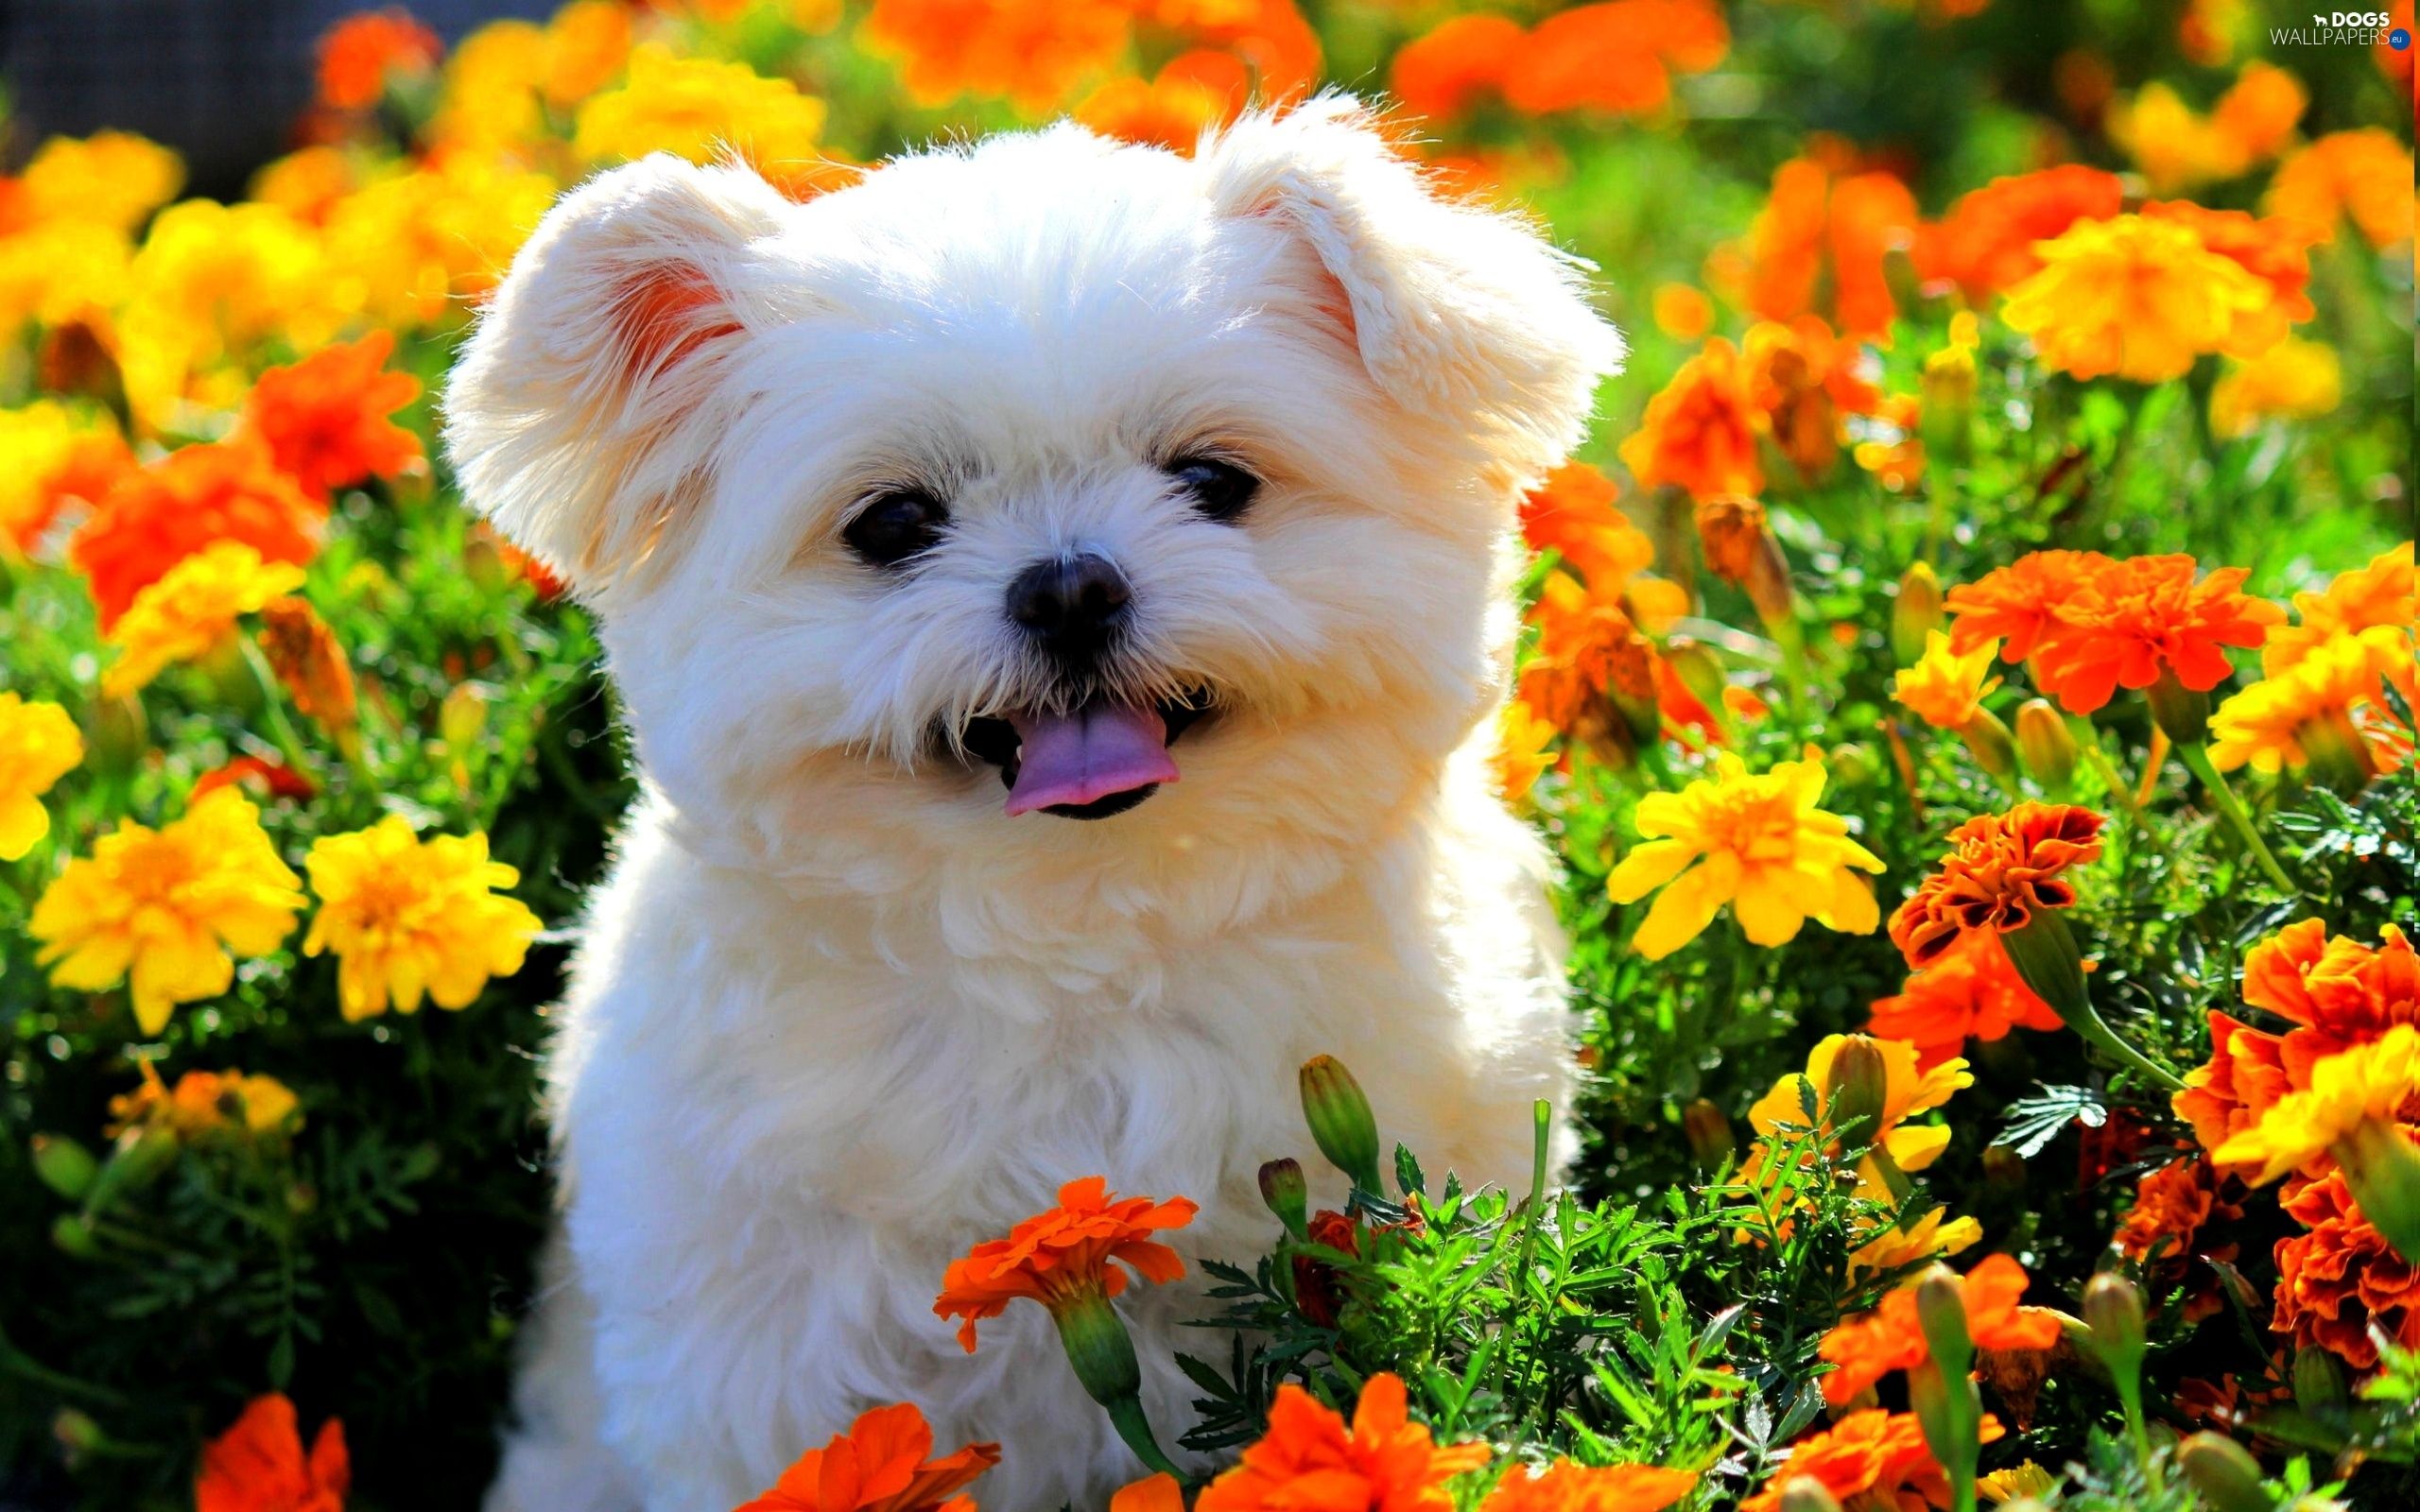 Download wallpaper Maltese Dog, puppy, flowers, white dog, cute animals, pets, dogs, Maltese for desktop with resolution 2560x1600. High Quality HD picture wallpaper